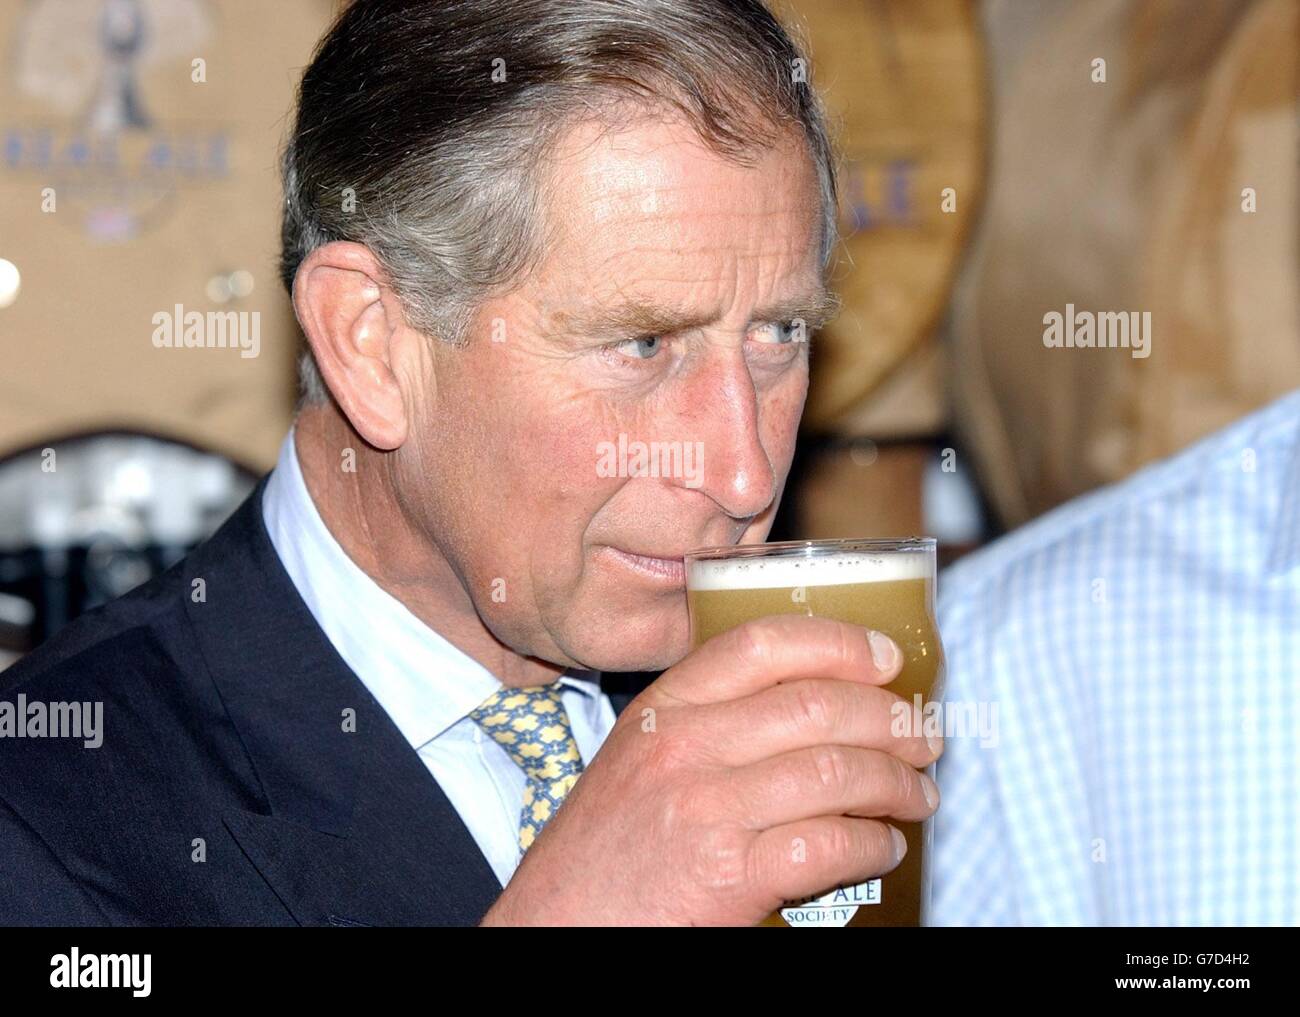 The Prince of Wales, prepares to taste a pint of Summer Lightning real ale from England's Hop Back brewery at the Lingotto complex in Turin, Italy, during a visit to the 'Salone Del Gusto' food festival. Stock Photo